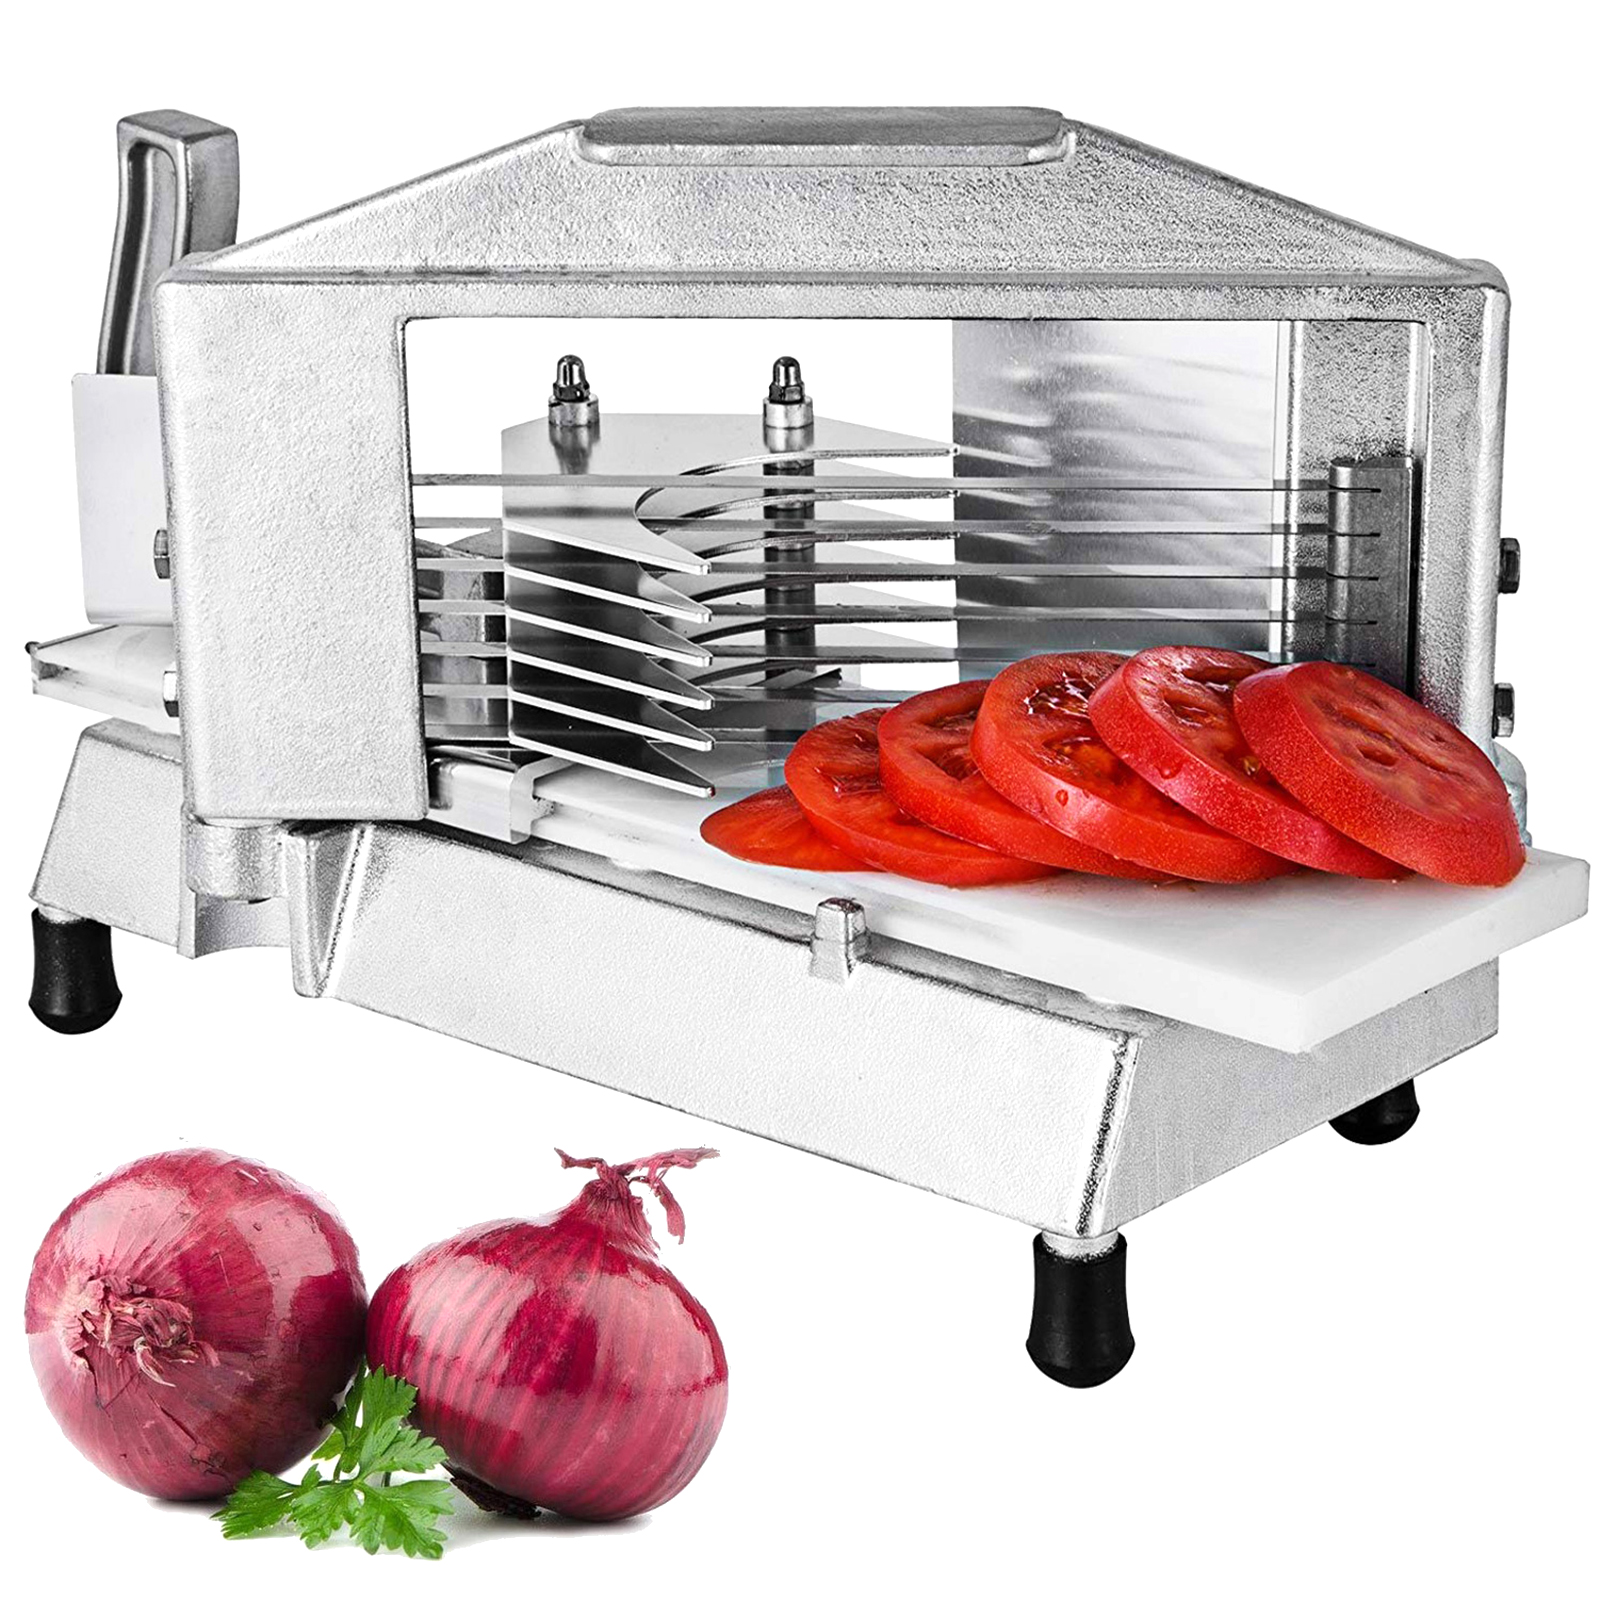 Commercial Food Slicers  Blooming Onion Cutter, Nemco Onion & Tomato Slicer,  Hand Food Processor, Commercial Cheese Shredder